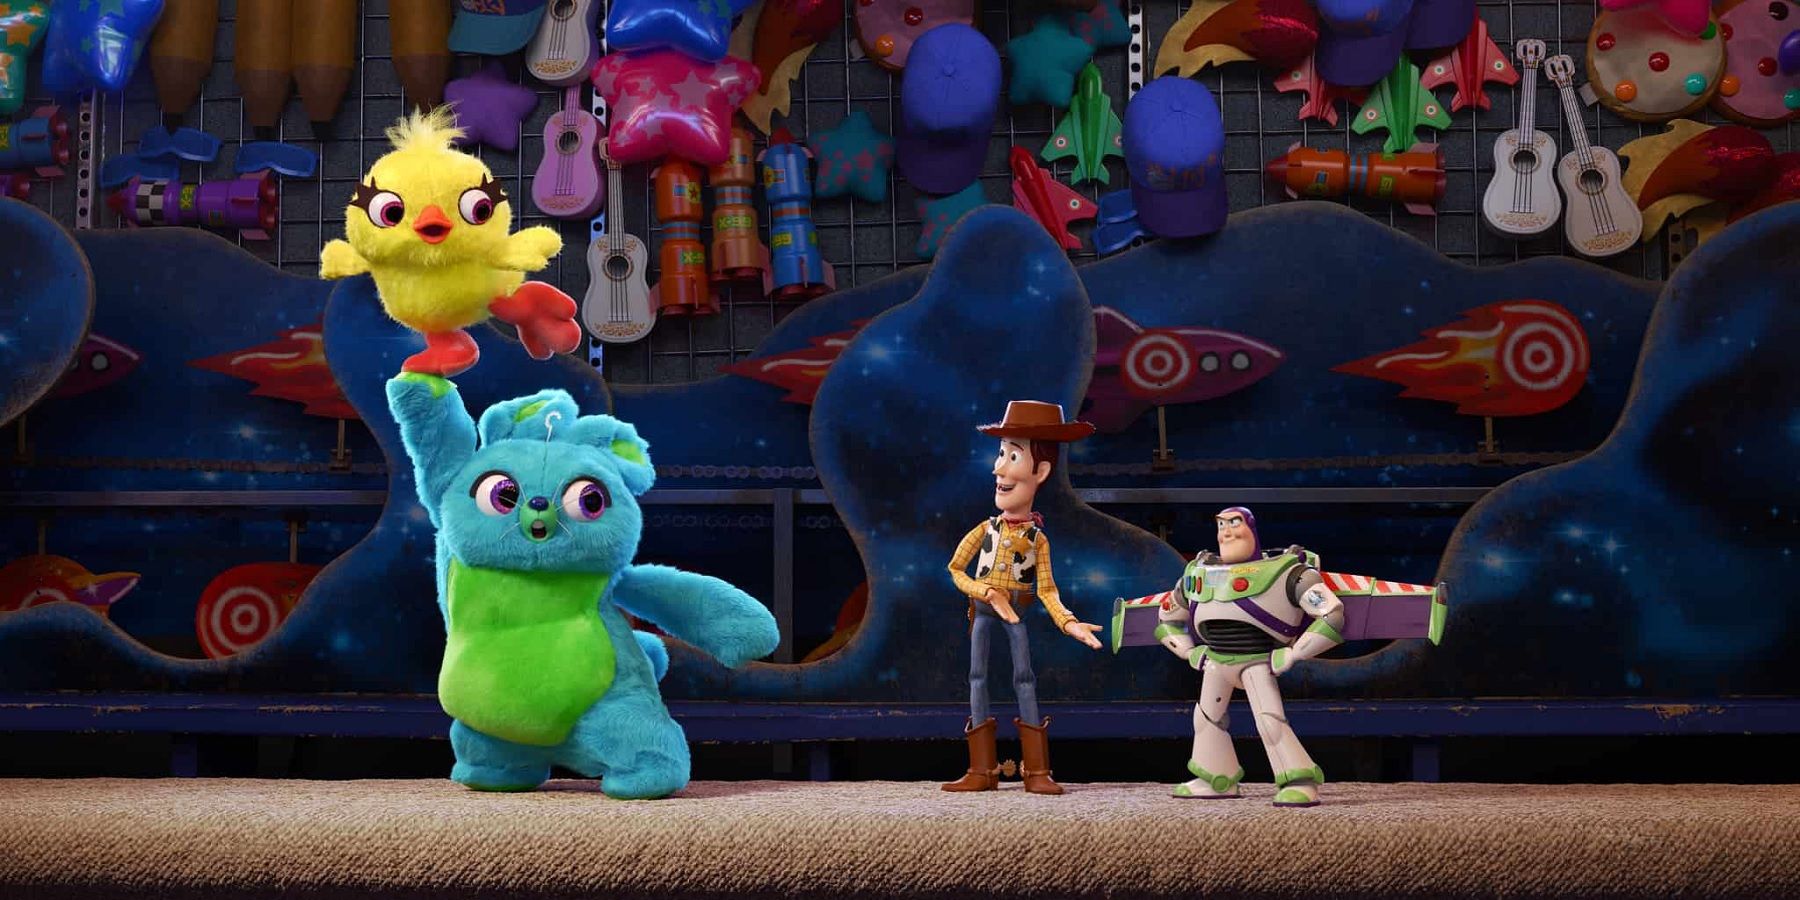 Duckie Bunny Woody and Buzz in Toy Story 4